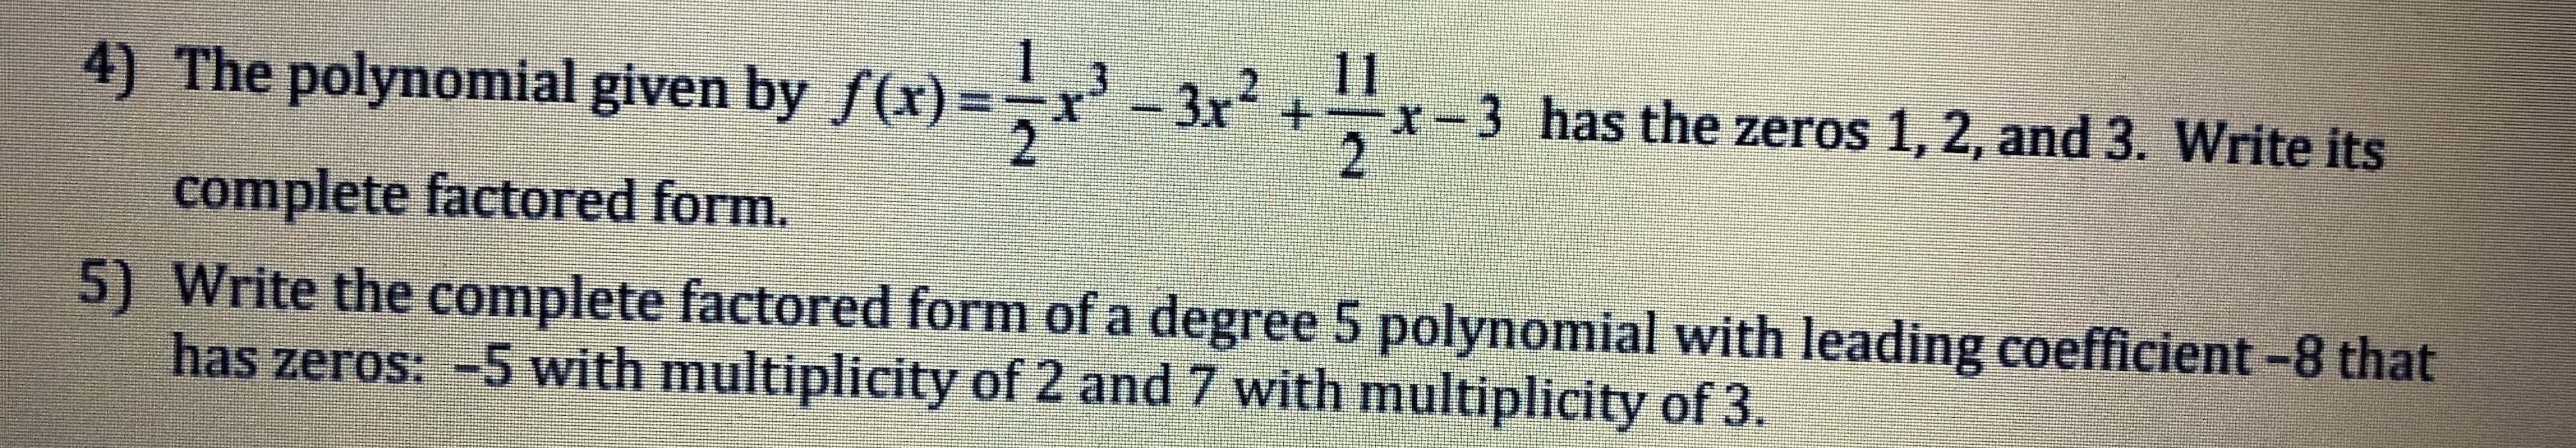 4) The polynomial given by f(x)
x2+r-3 has the zeros 1, 2, and 3. Write its
complete factored form.
5) Write the complete factored form of a degree 5 polynomial with leading coefficient -8 that
has zeros: -5 with multiplicity of 2 and 7 with multiplicity of 3.
